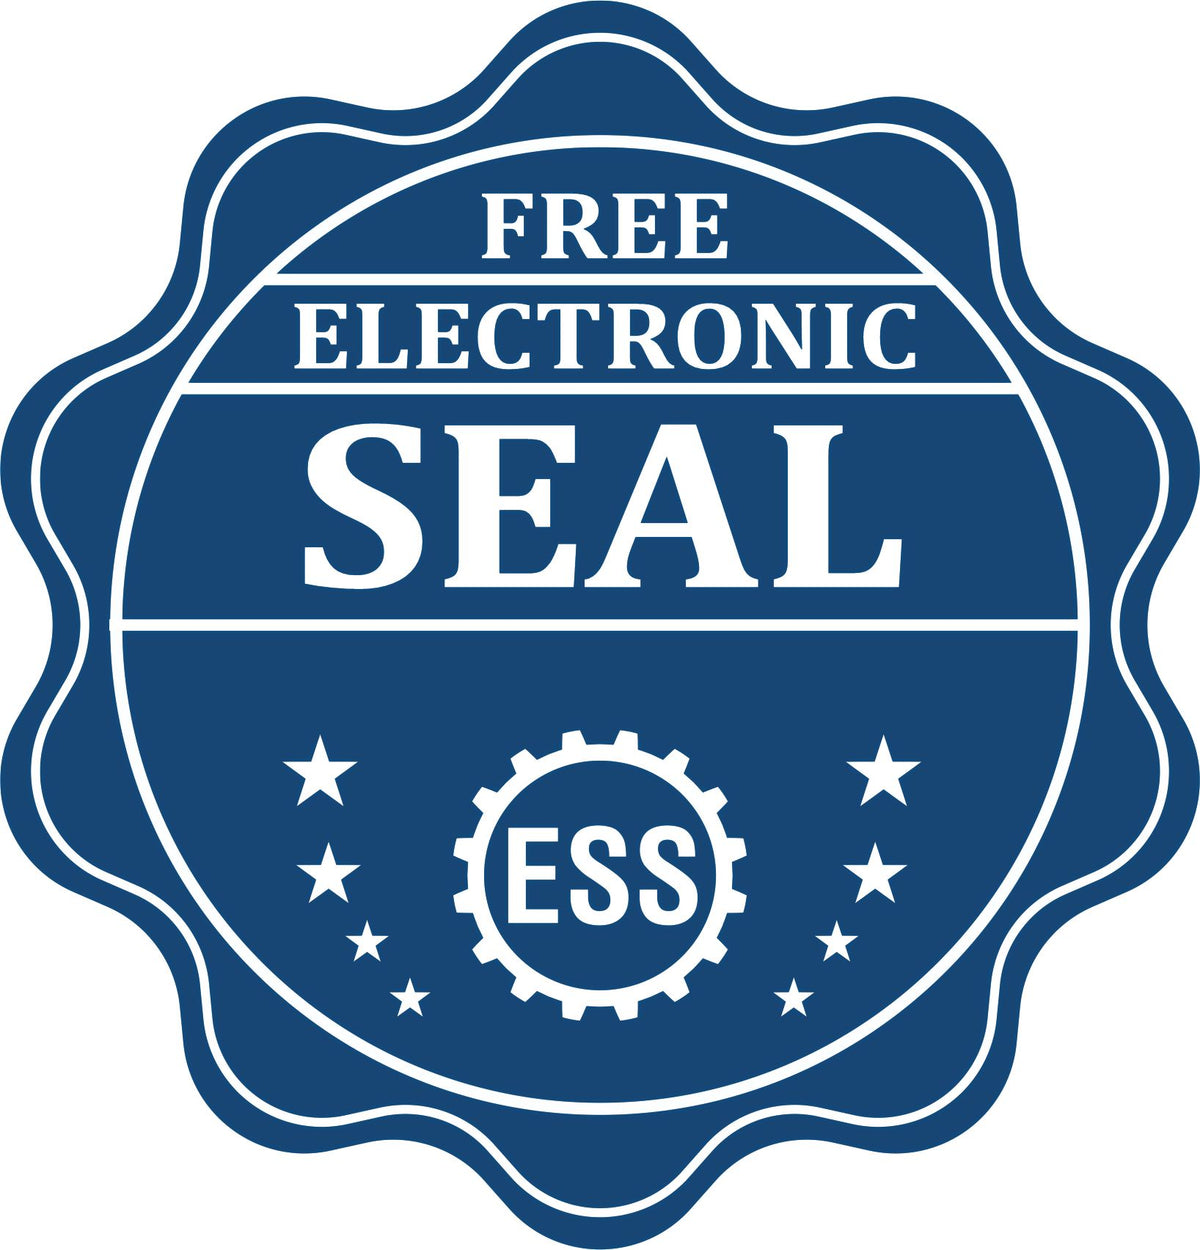 A badge showing a free electronic seal for the Soft Tennessee Professional Engineer Seal with stars and the ESS gear on the emblem.